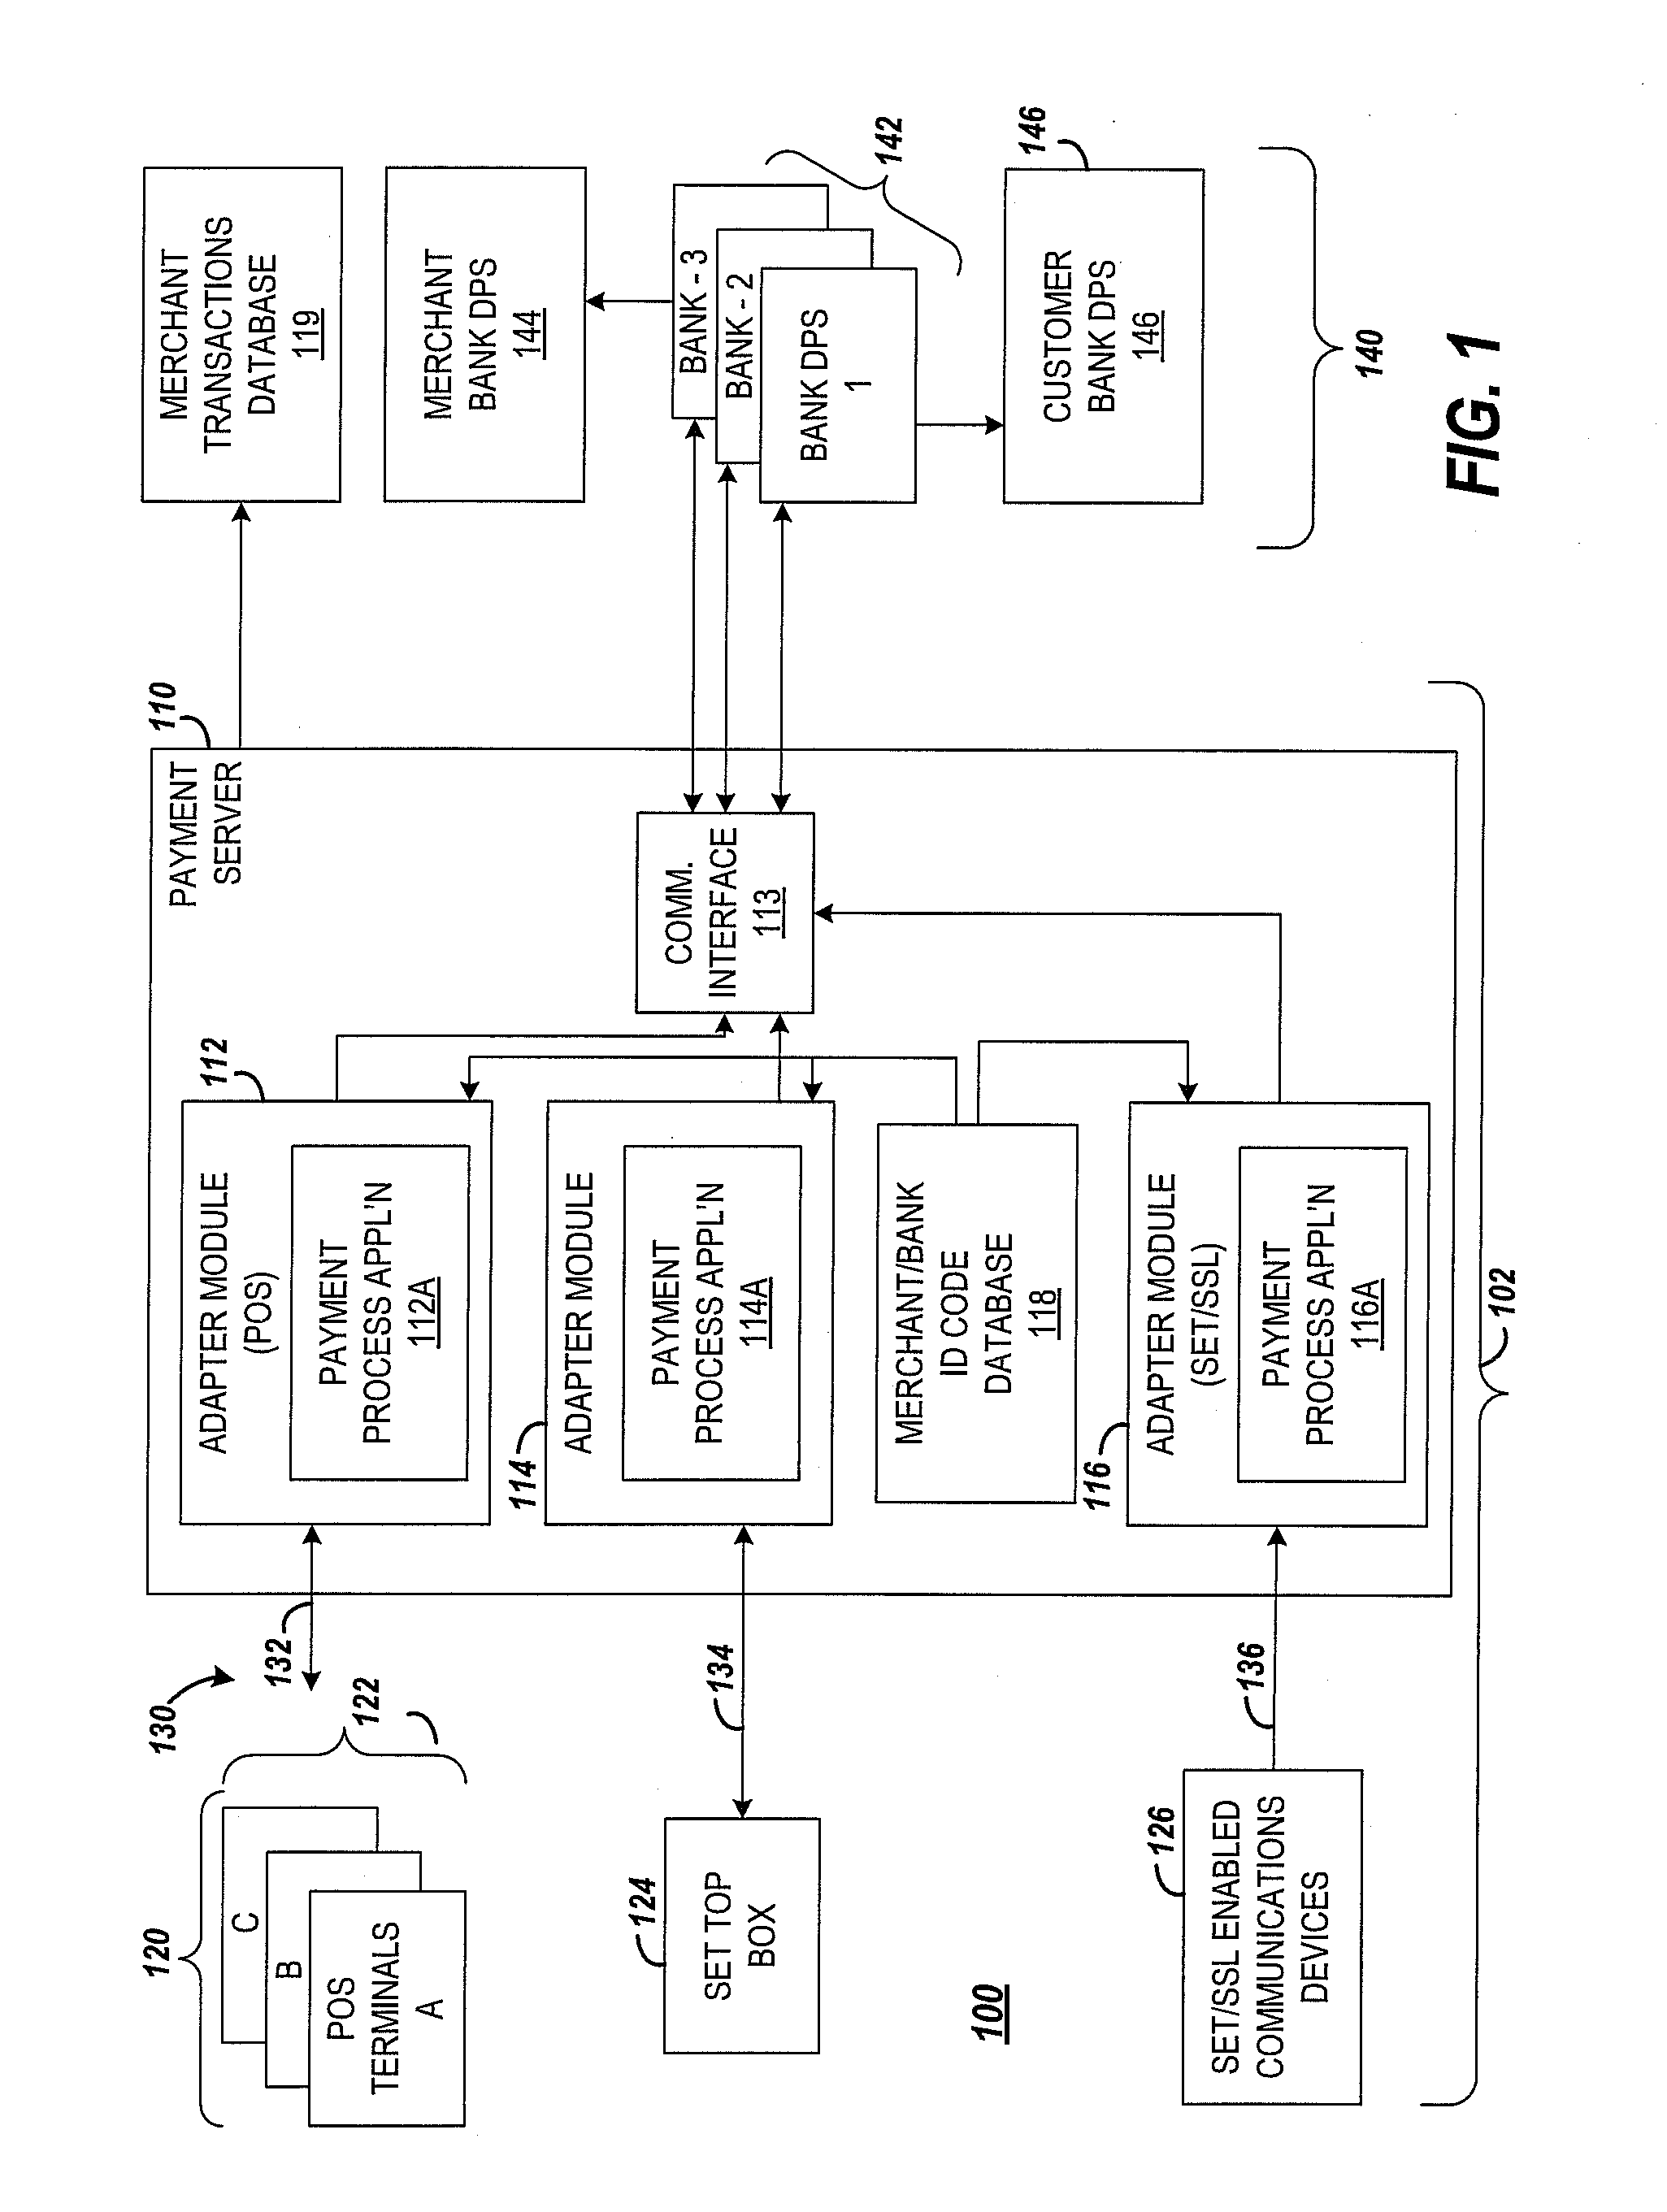 System and arrangement for processing payments for purchases through a payment server